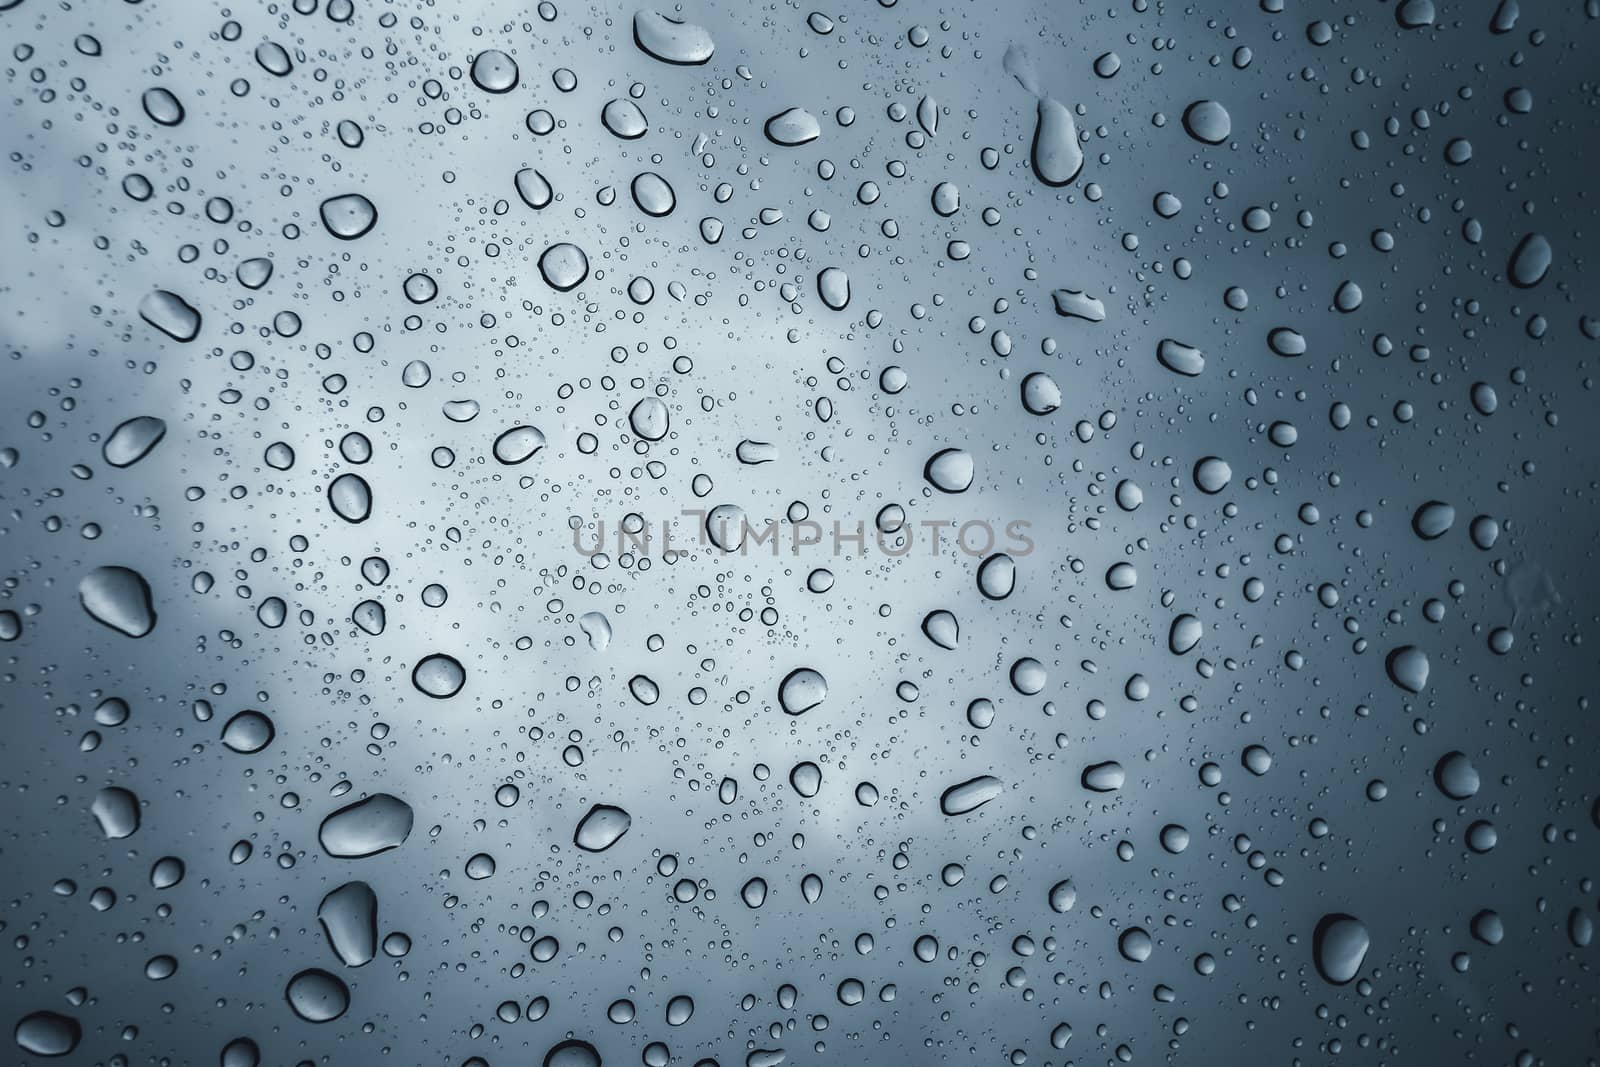 raindrops on glass with overcast sky background